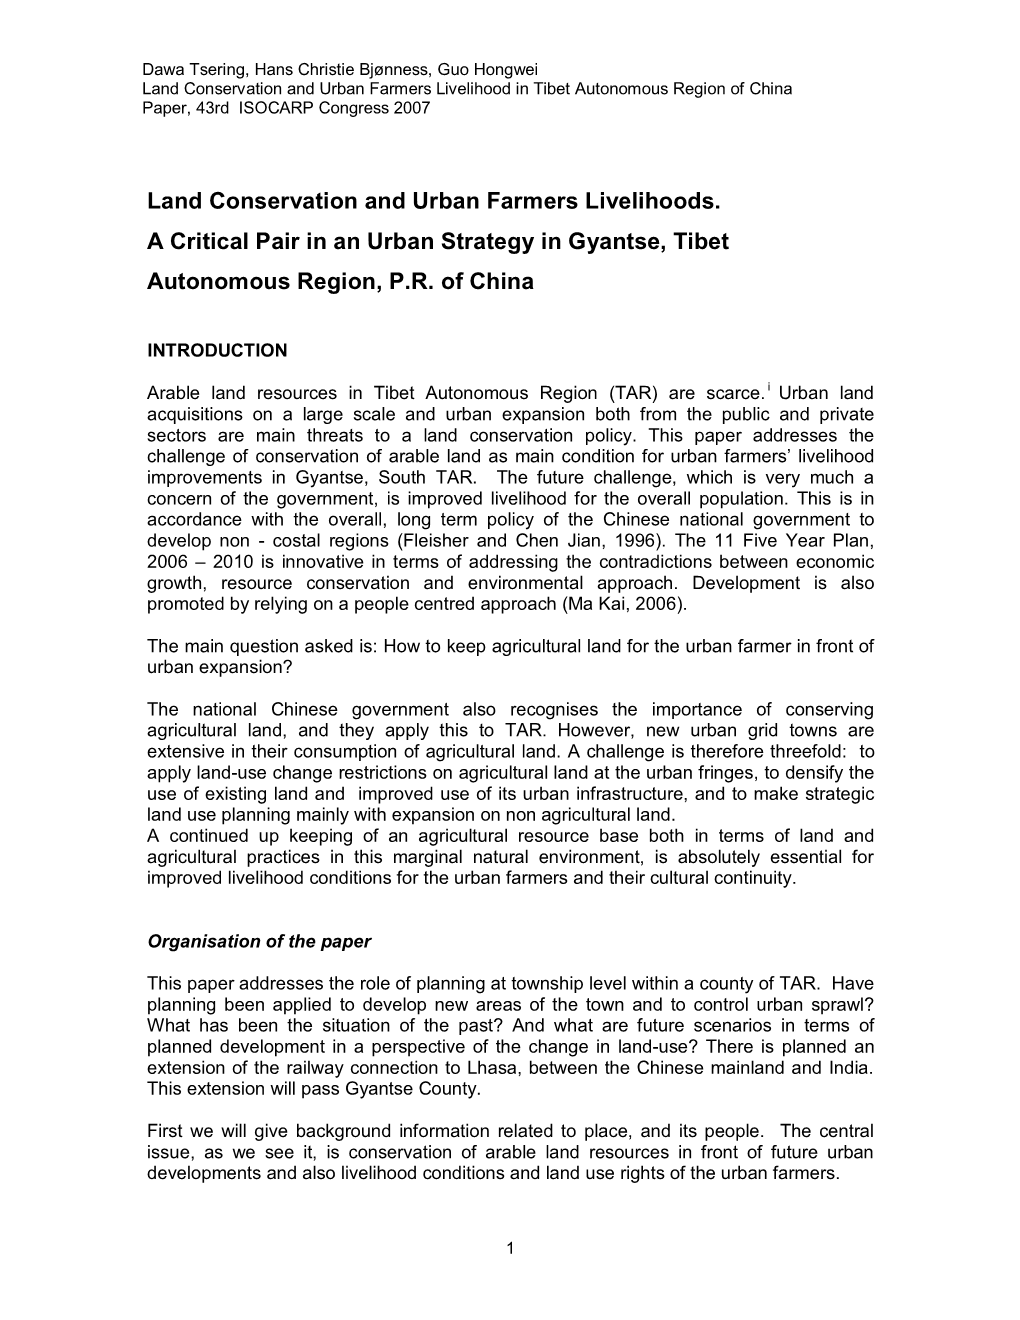 Land Conservation and Urban Farmers Livelihoods. a Critical Pair in an Urban Strategy in Gyantse, Tibet Autonomous Region, P.R